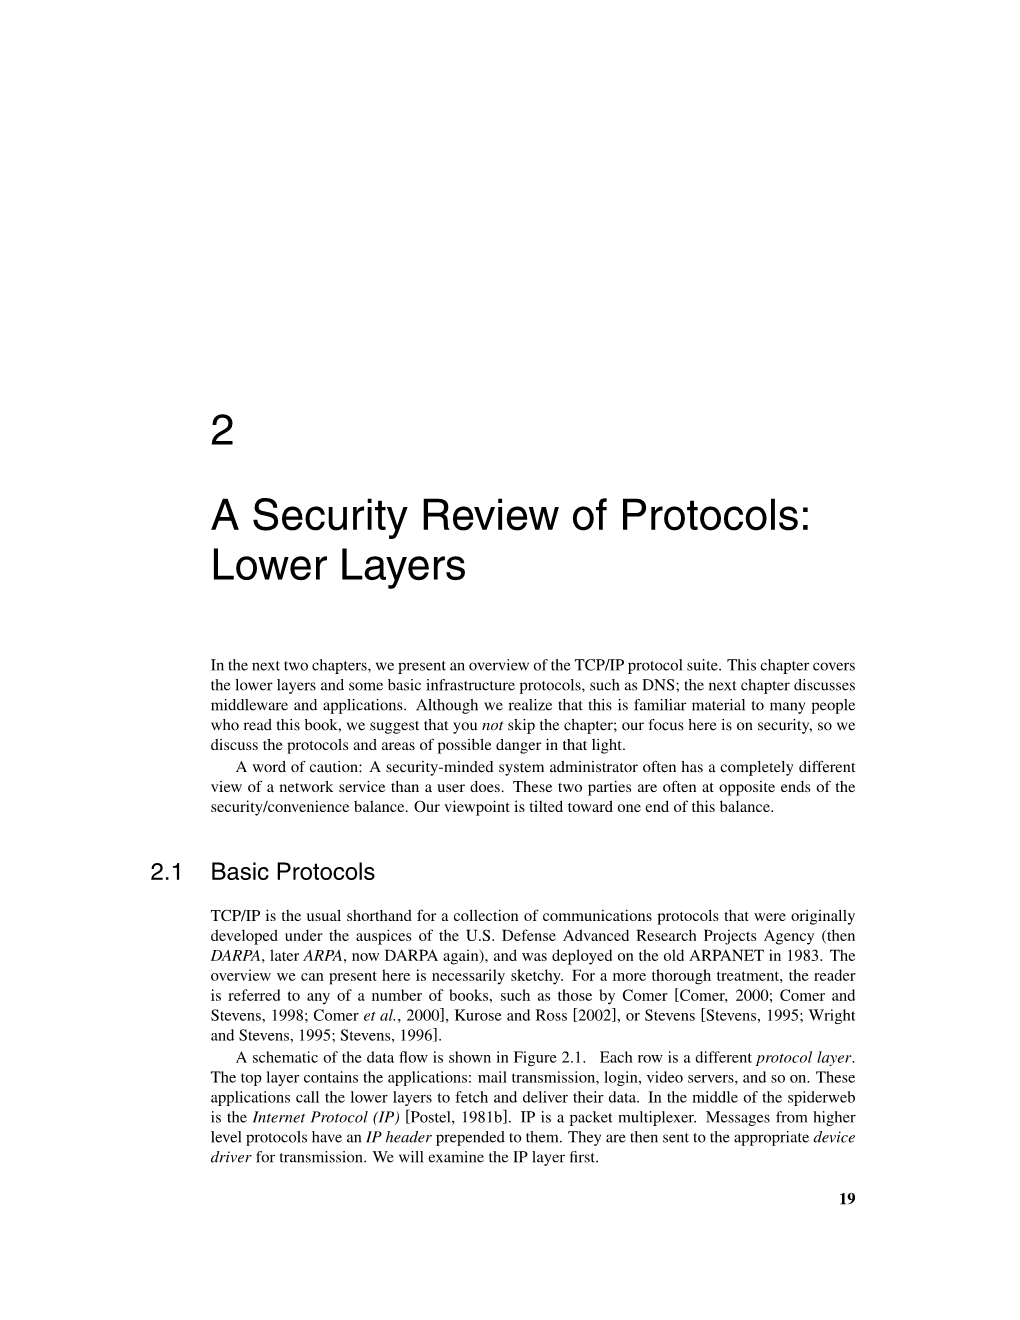 2 a Security Review of Protocols: Lower Layers